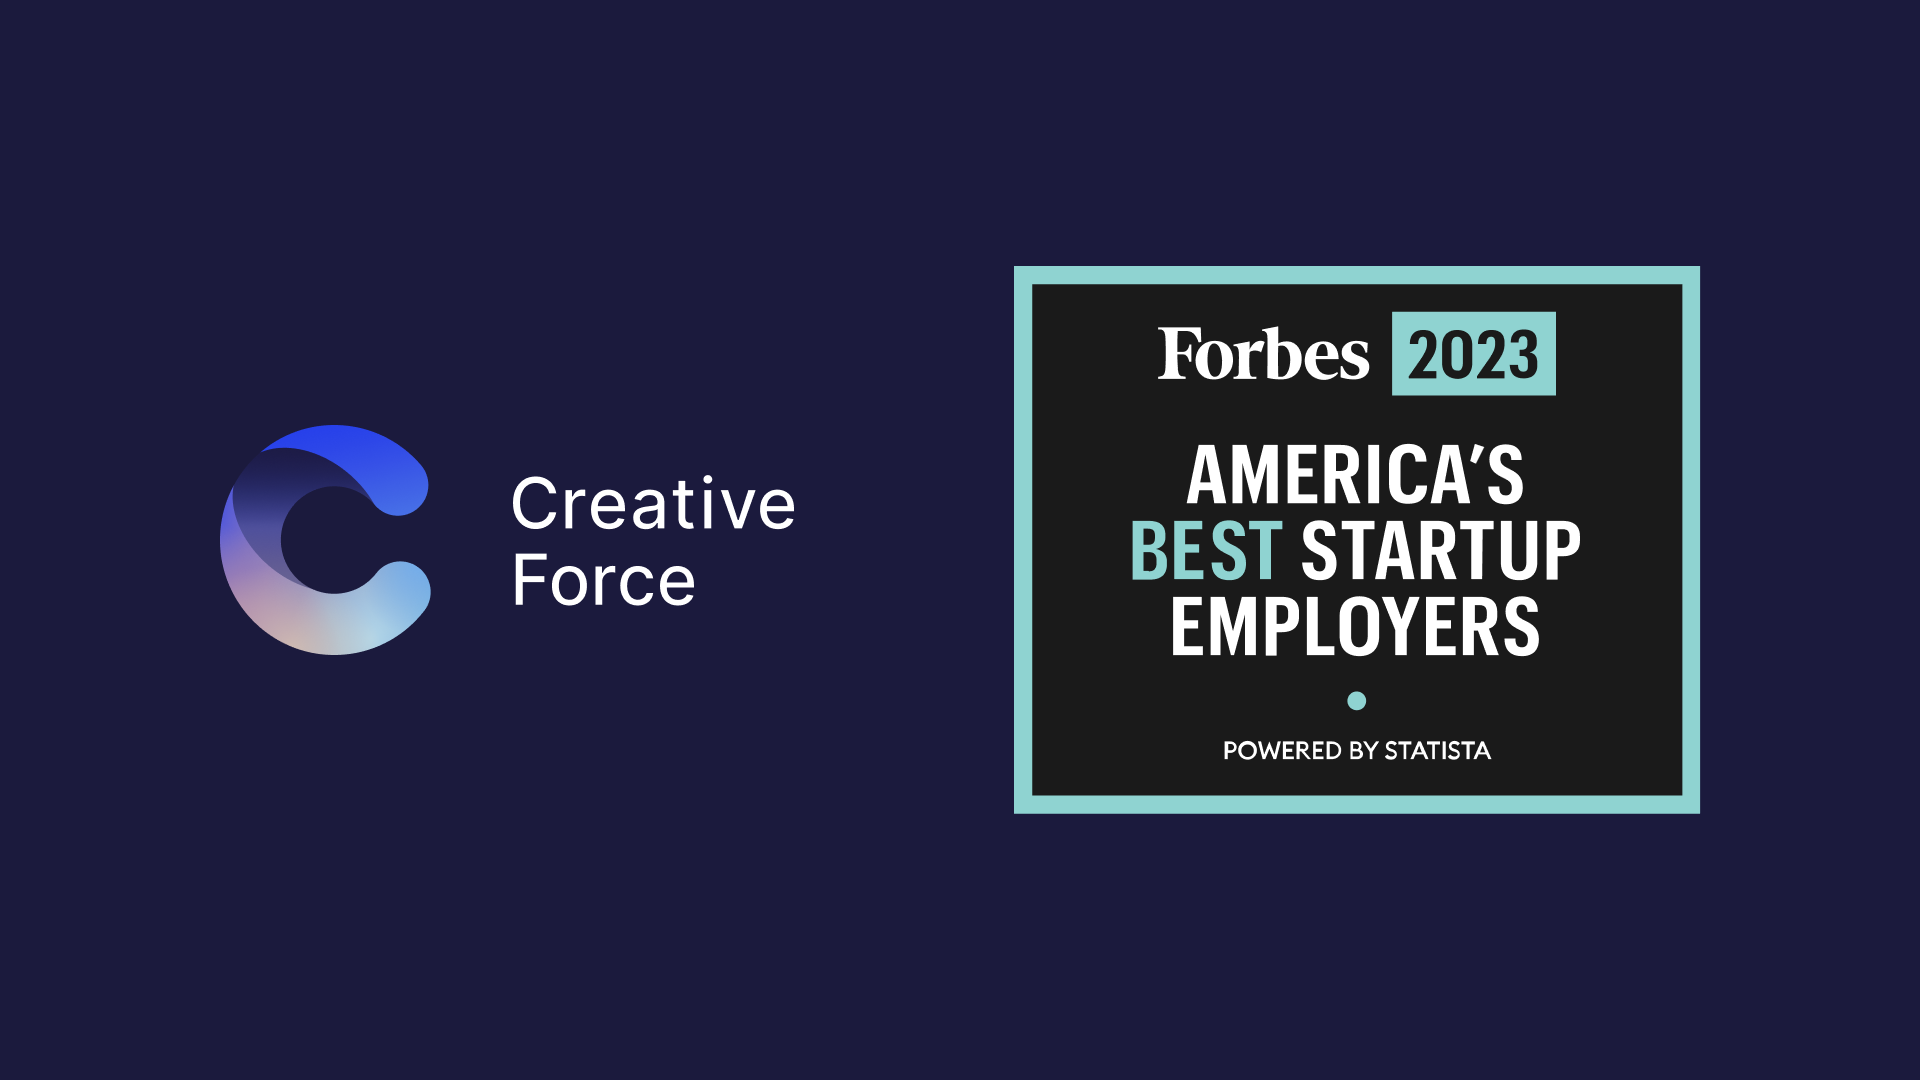 Creative Force Forbes America Best Startup Employers 1920x1080